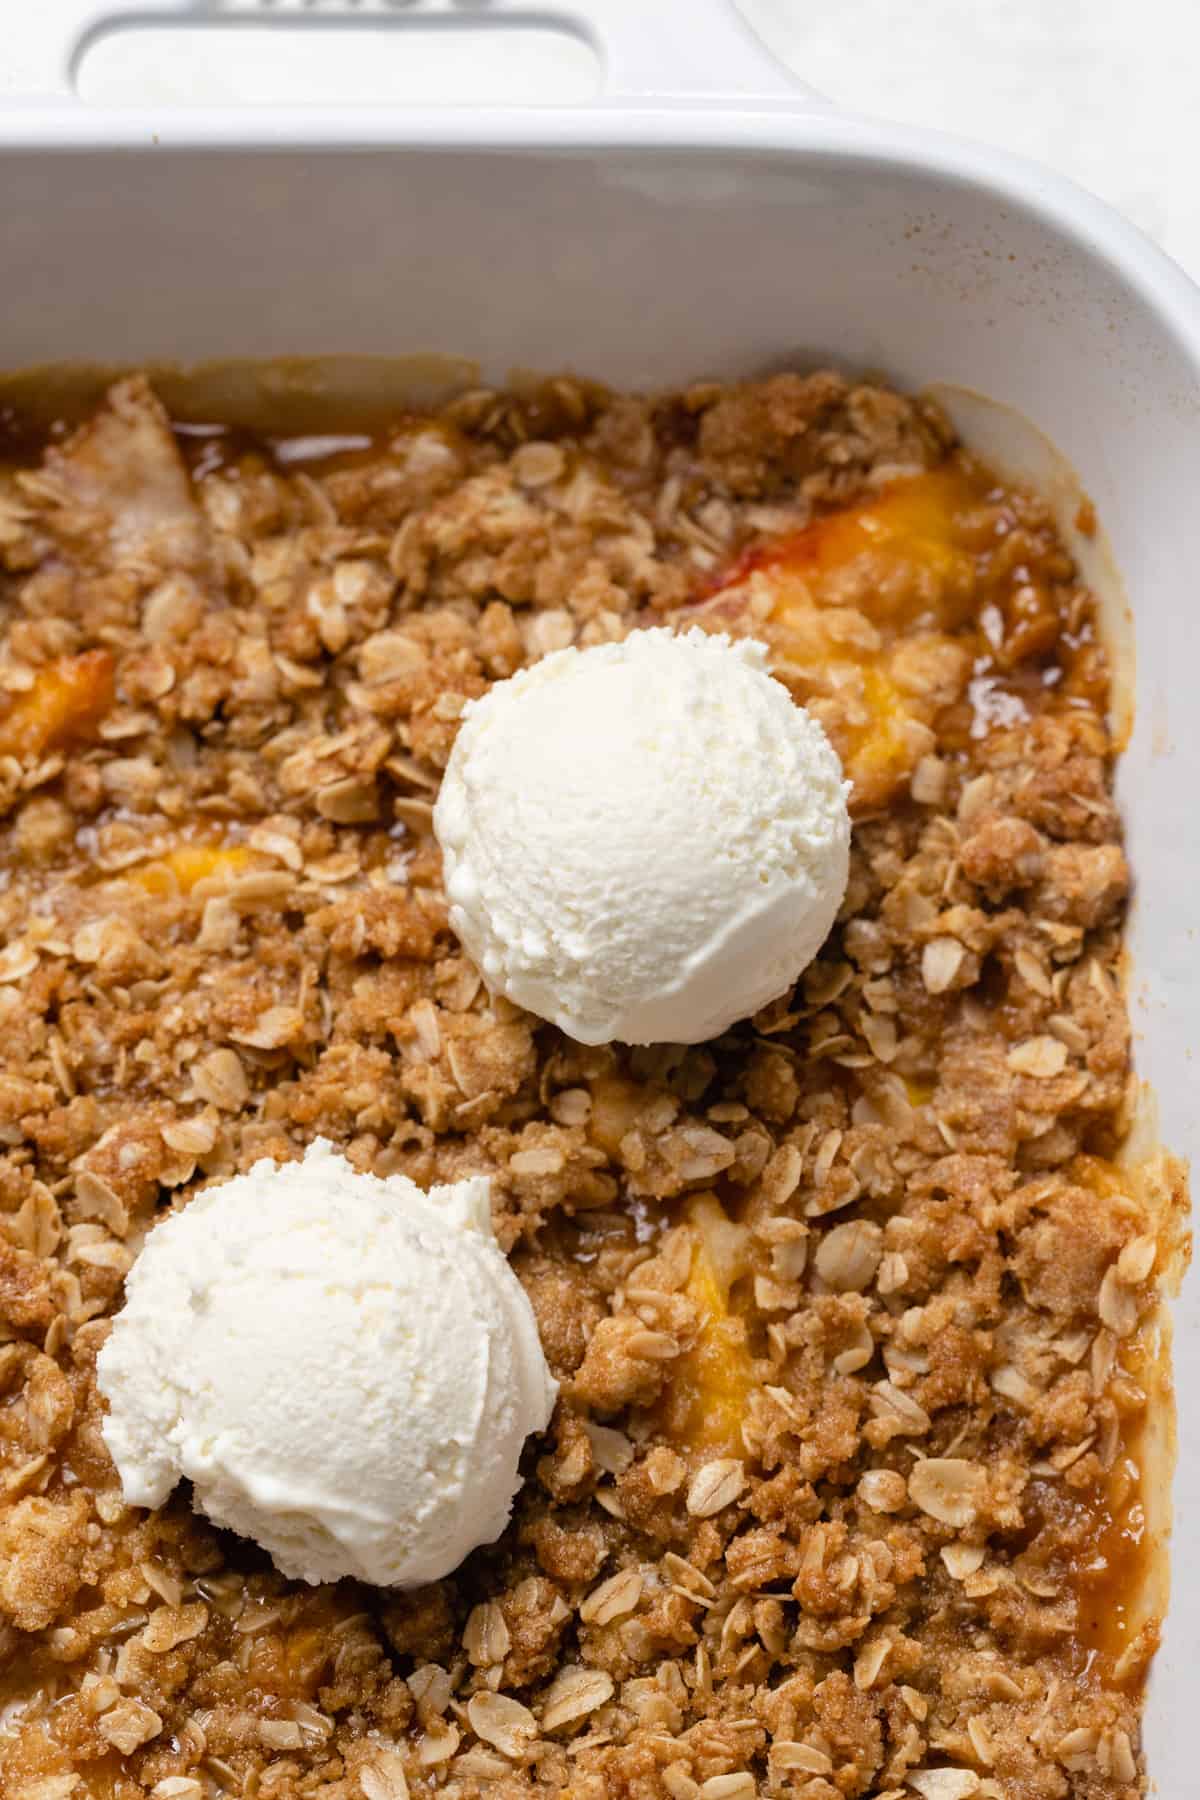 Peach crisp in a large dish with 2 scoops of vanilla ice cream on top.